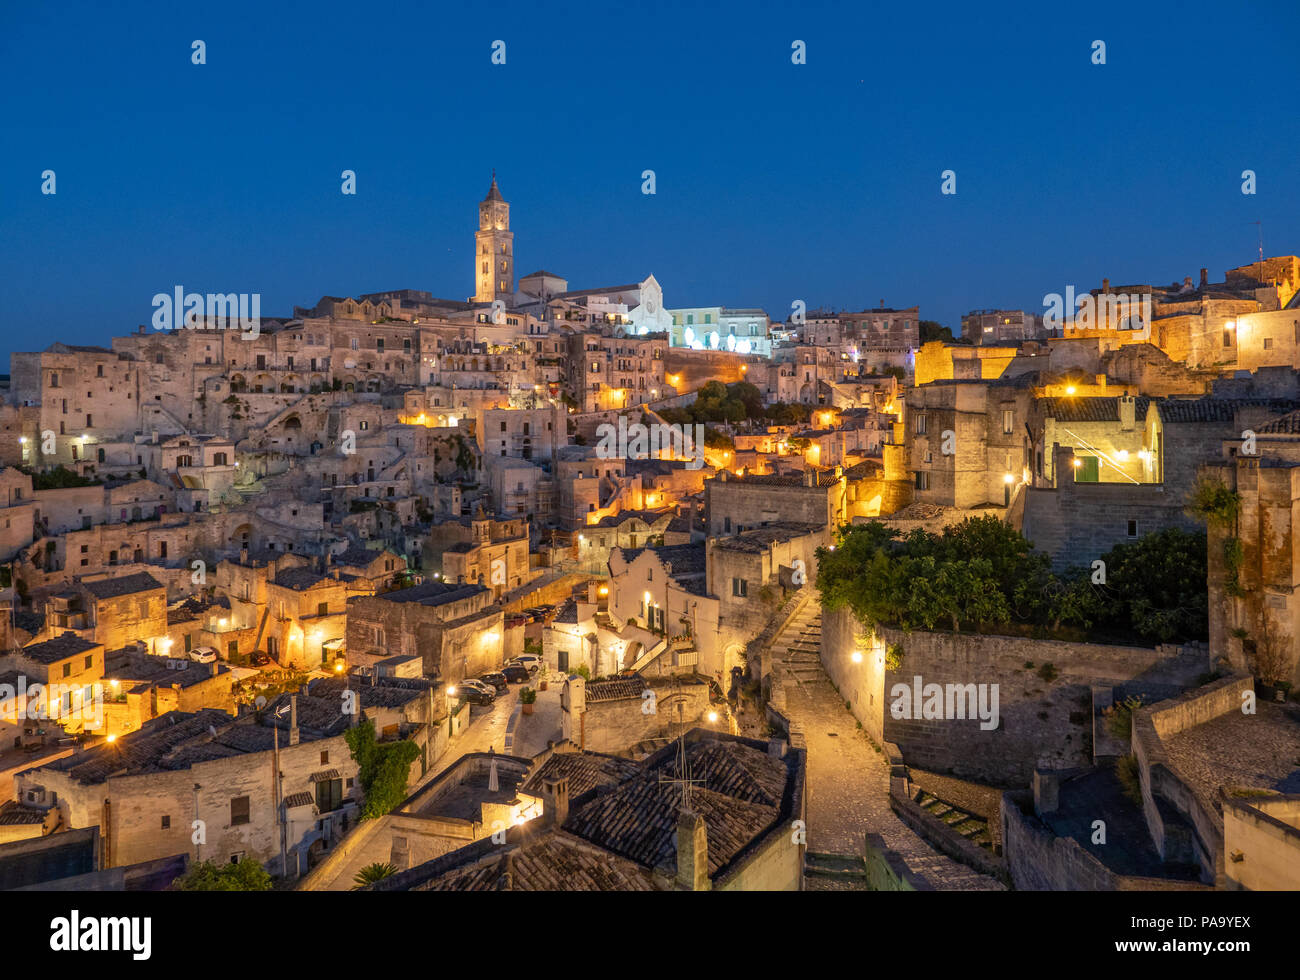 Matera (Basilicata) - The historic center of the wonderful stone city of southern Italy, a tourist attraction for the famous 'Sassi' old town. Stock Photo